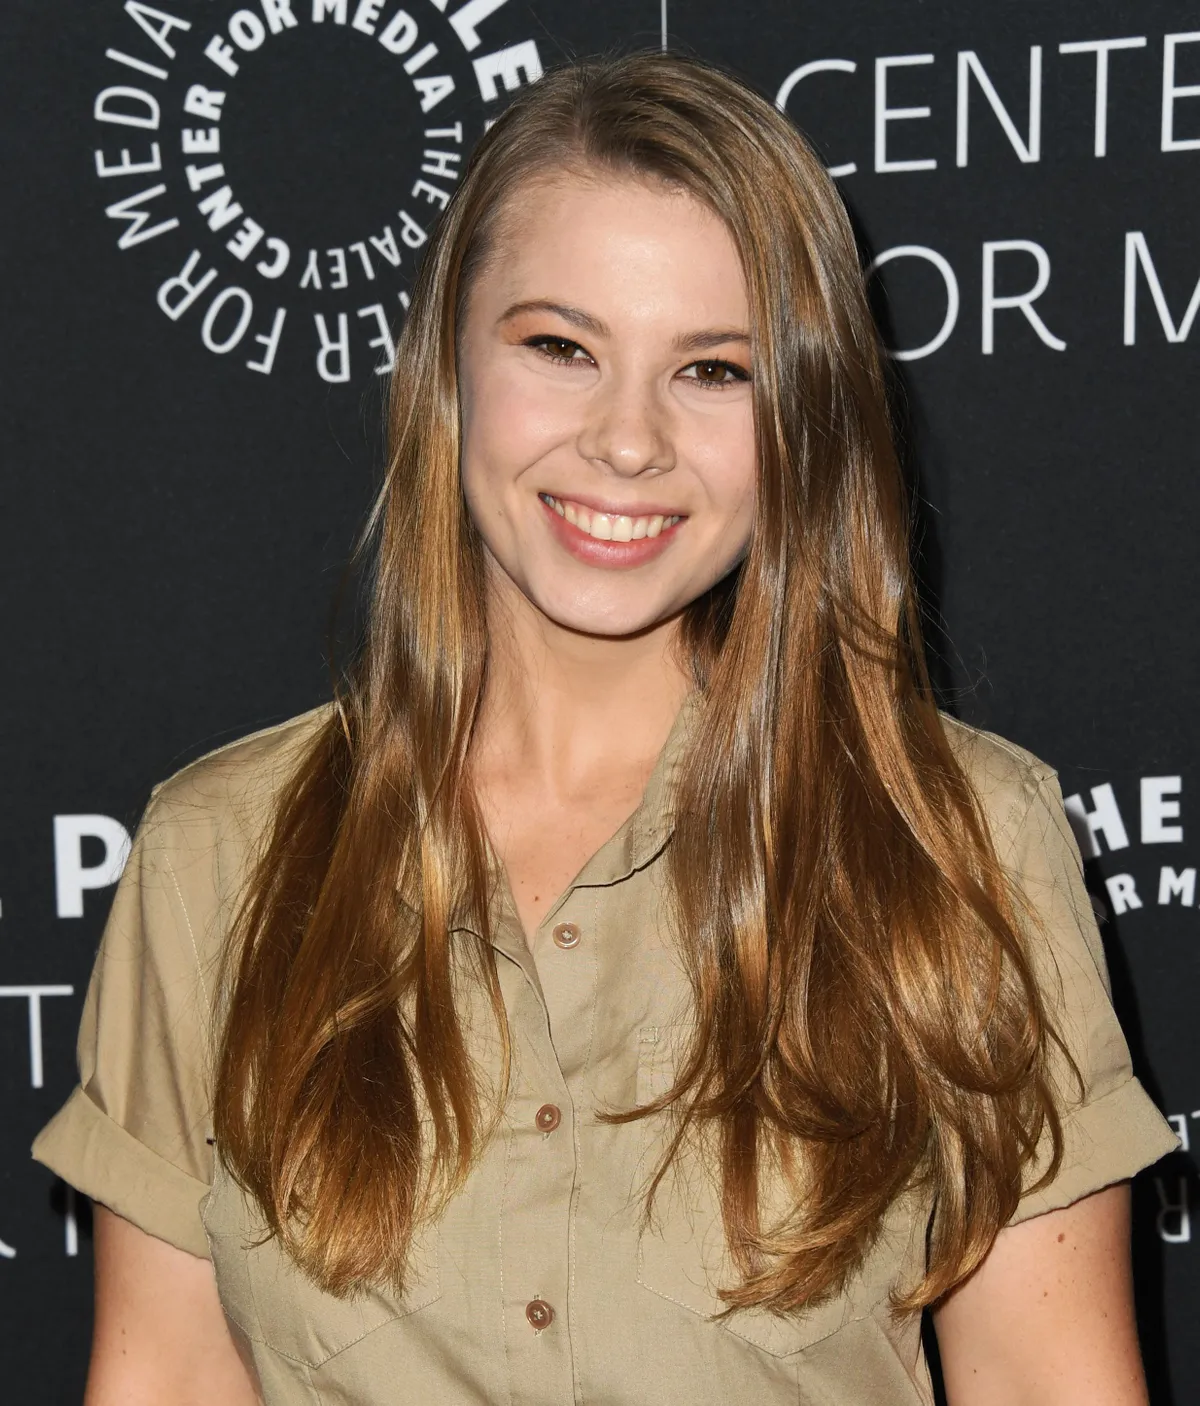 Bindi Irwin at The Paley Center For Media Presents: An Evening With The Irwins: "Crikey! It's The Irwins" Screening And Conversation on May 03, 2019. | Photo: Getty Images